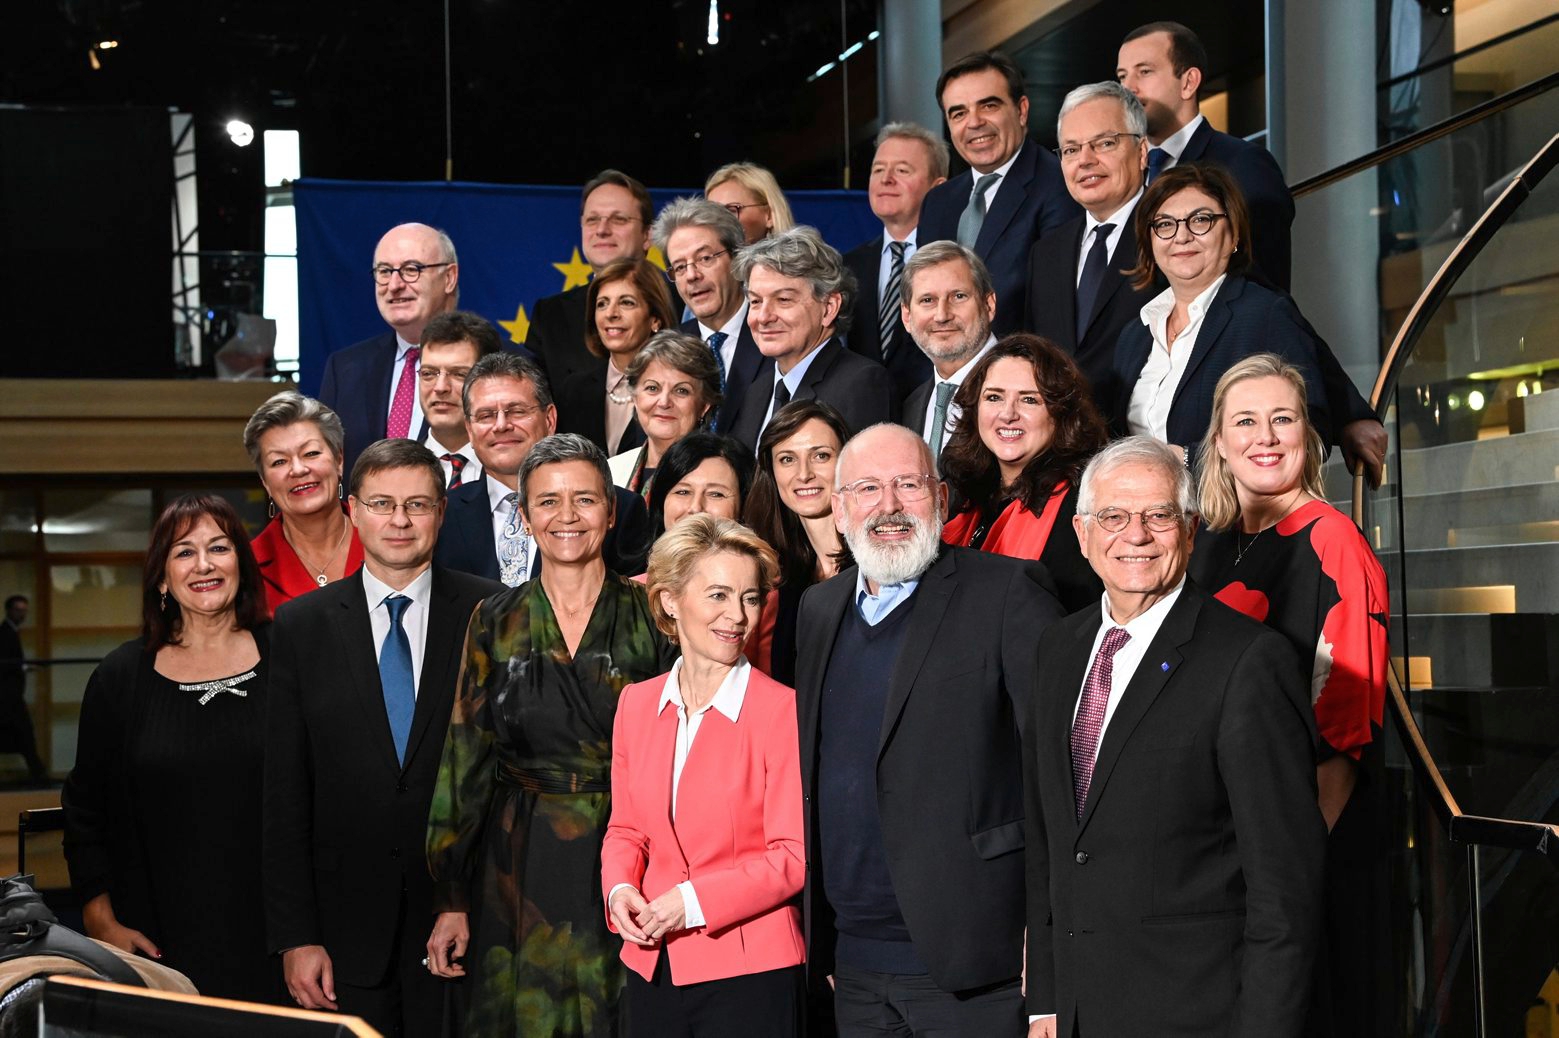 epa08028768 European Commission President Ursula von der Leyen (C) poses with new members of EU Commission, after the vote of Members of the EU Parliament on her college of commissioners, in Strasbourg, France, 27 November 2019.  EPA/PATRICK SEEGER EUROPEAN PARLIAMENT FRANCE STRASBOURG